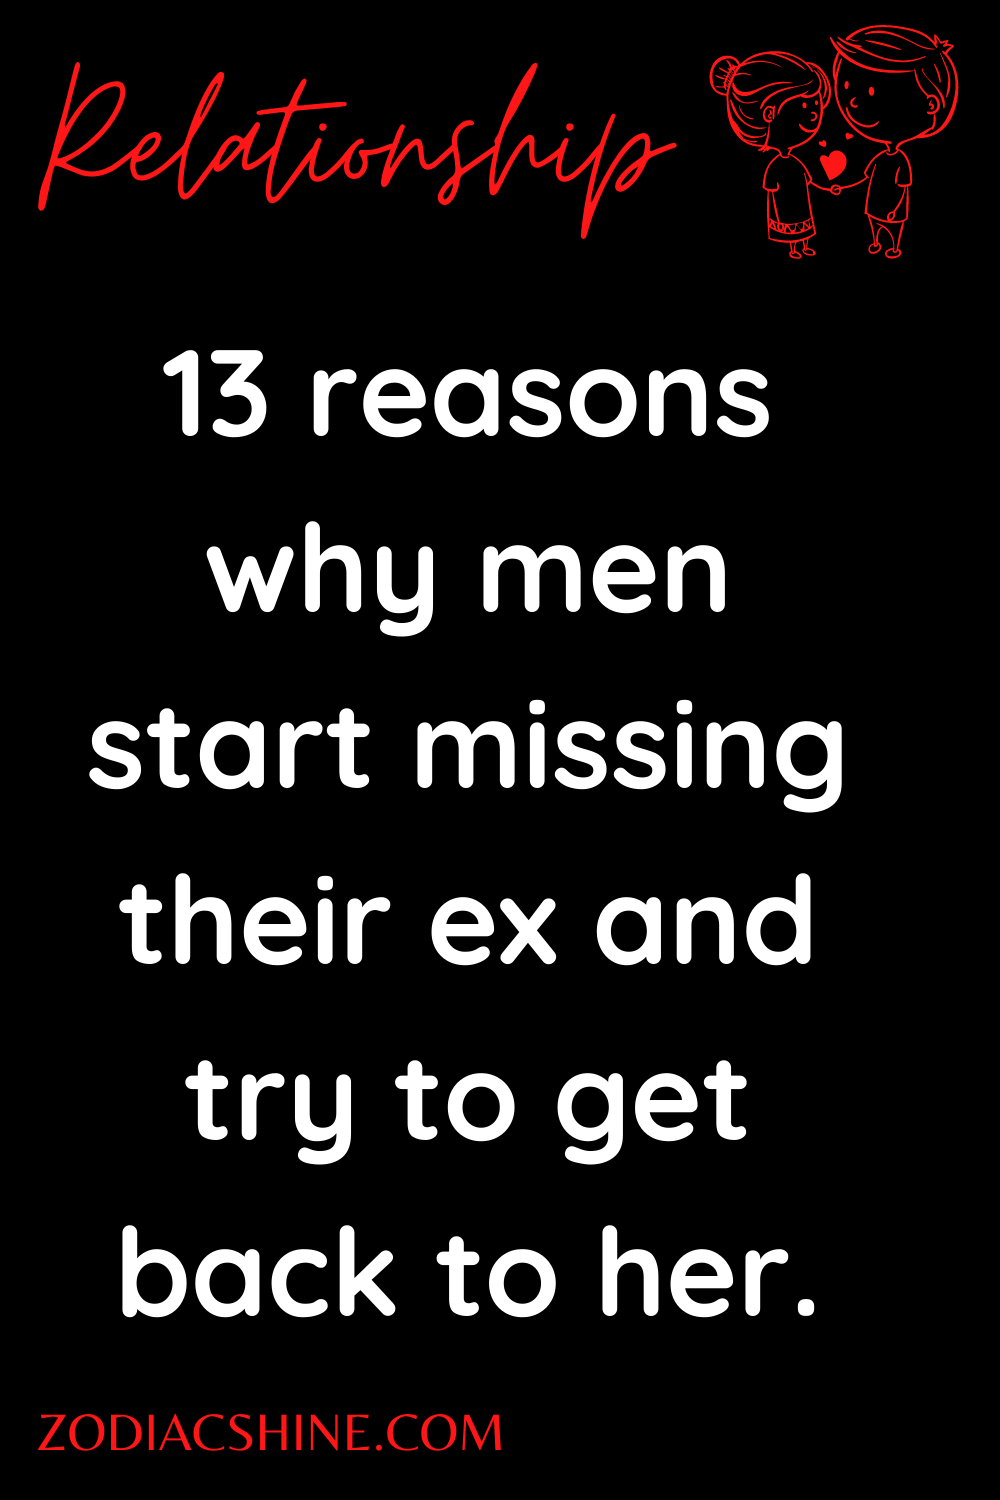 13 reasons why men start missing their ex and try to get back to her.